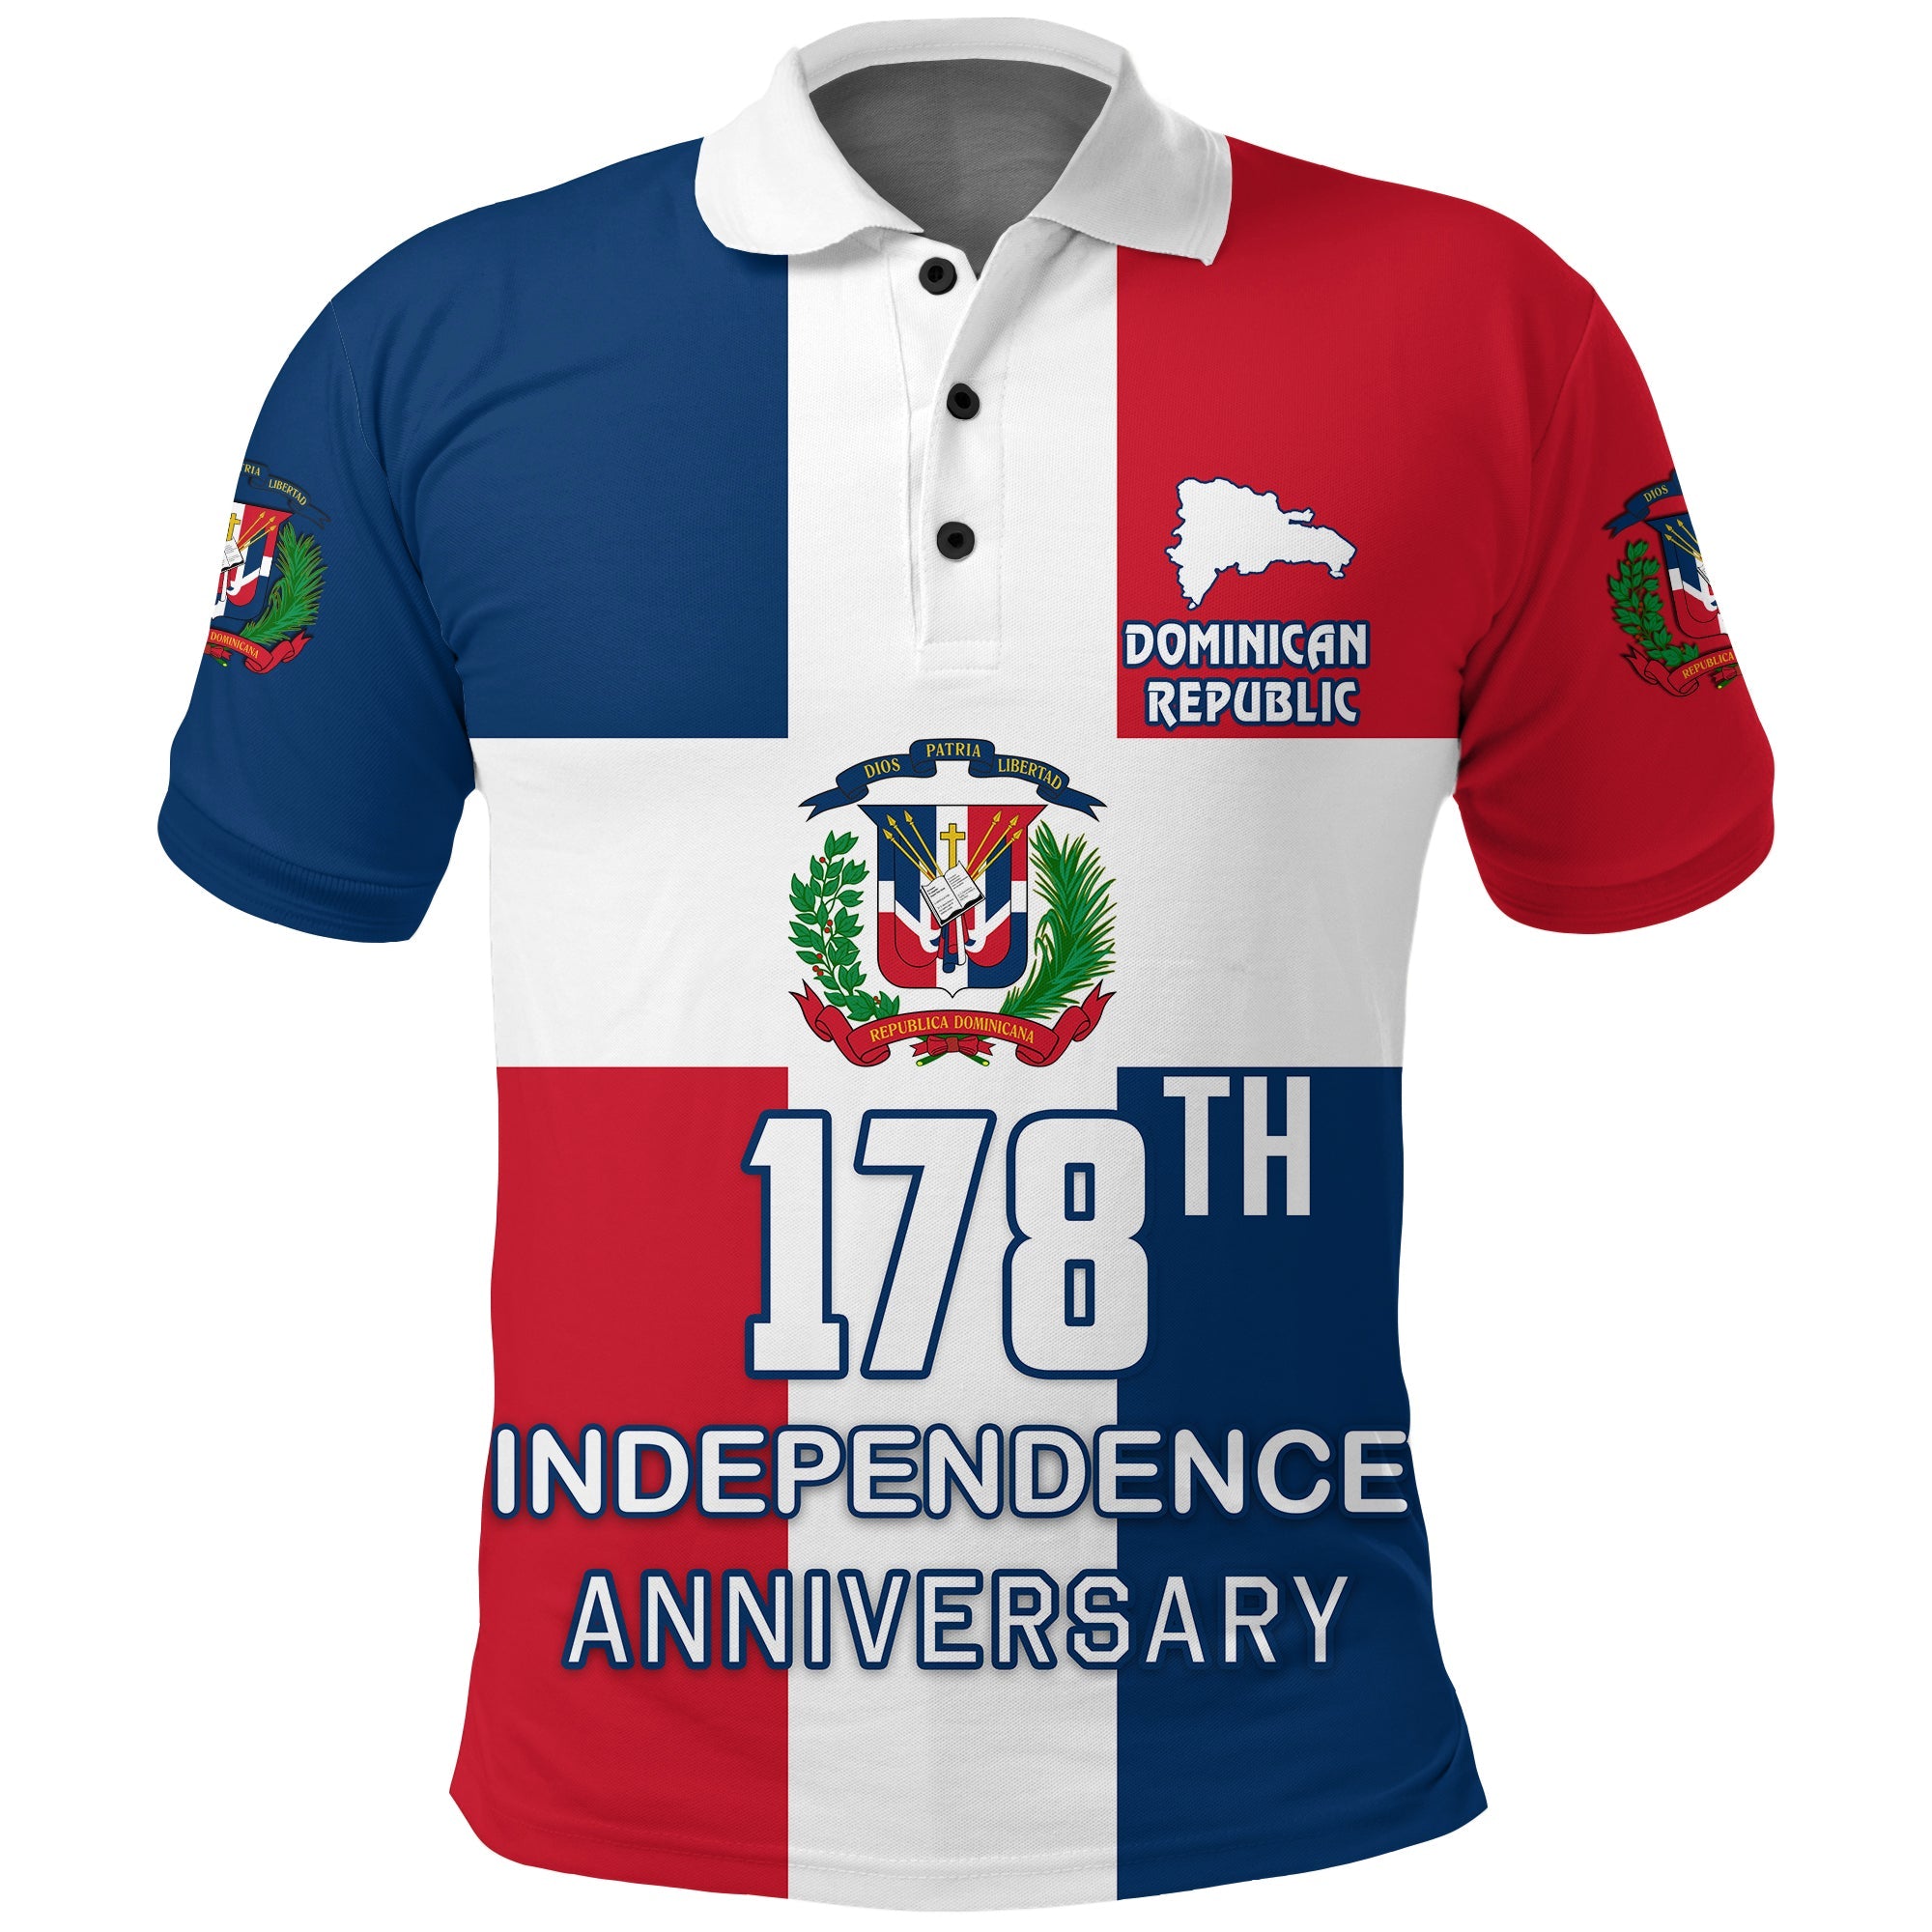 dominican-republic-178th-independence-anniversary-polo-shirt